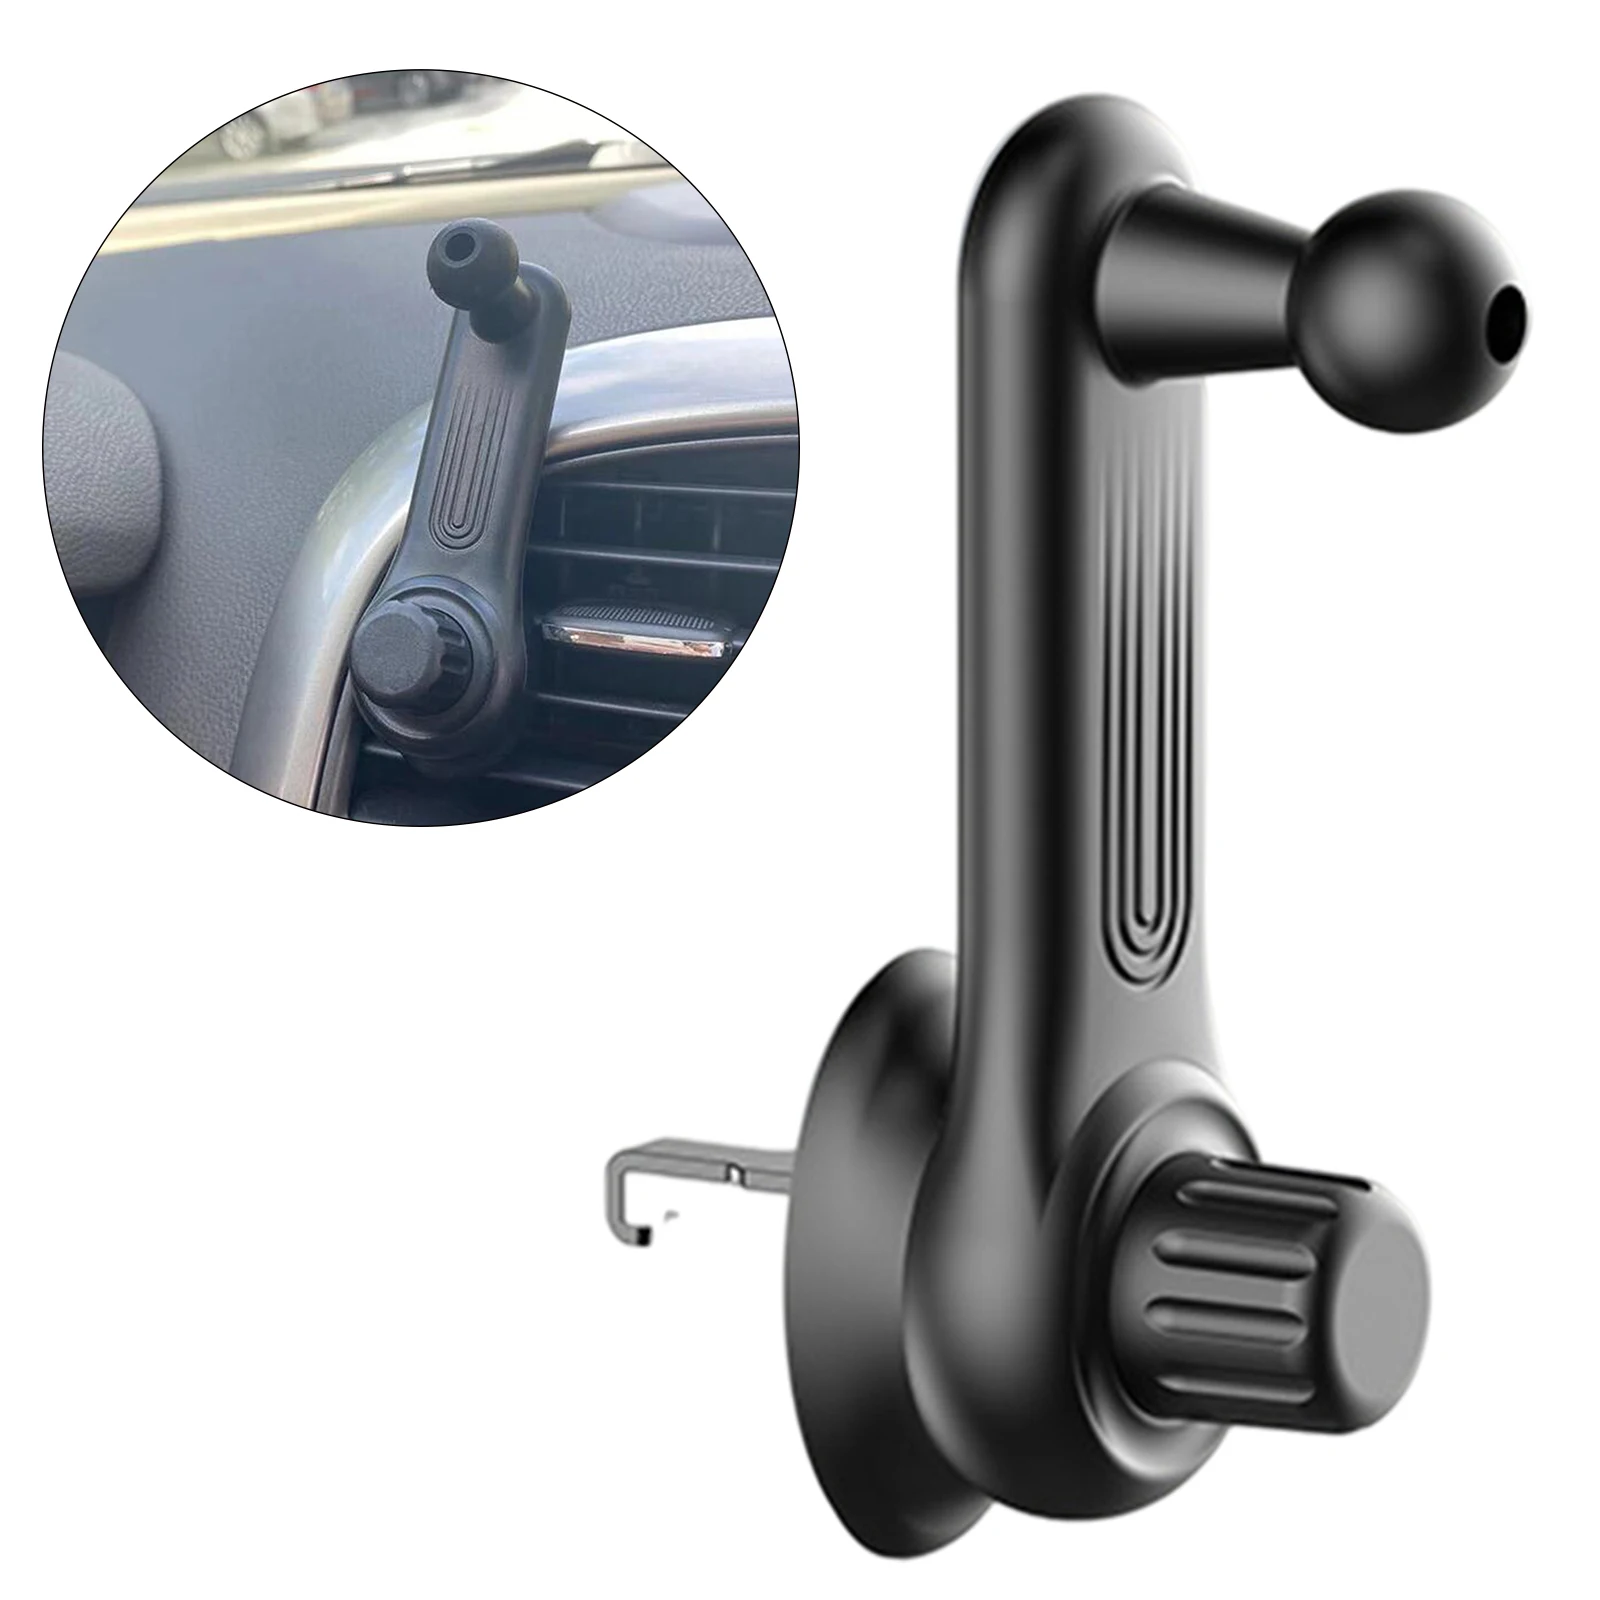 

Universal Clip Car Phone Holder Bracket Extension Hook 360 Rotatable Supplies for Air Vent Air Outlet Smartphone Wired Earphone